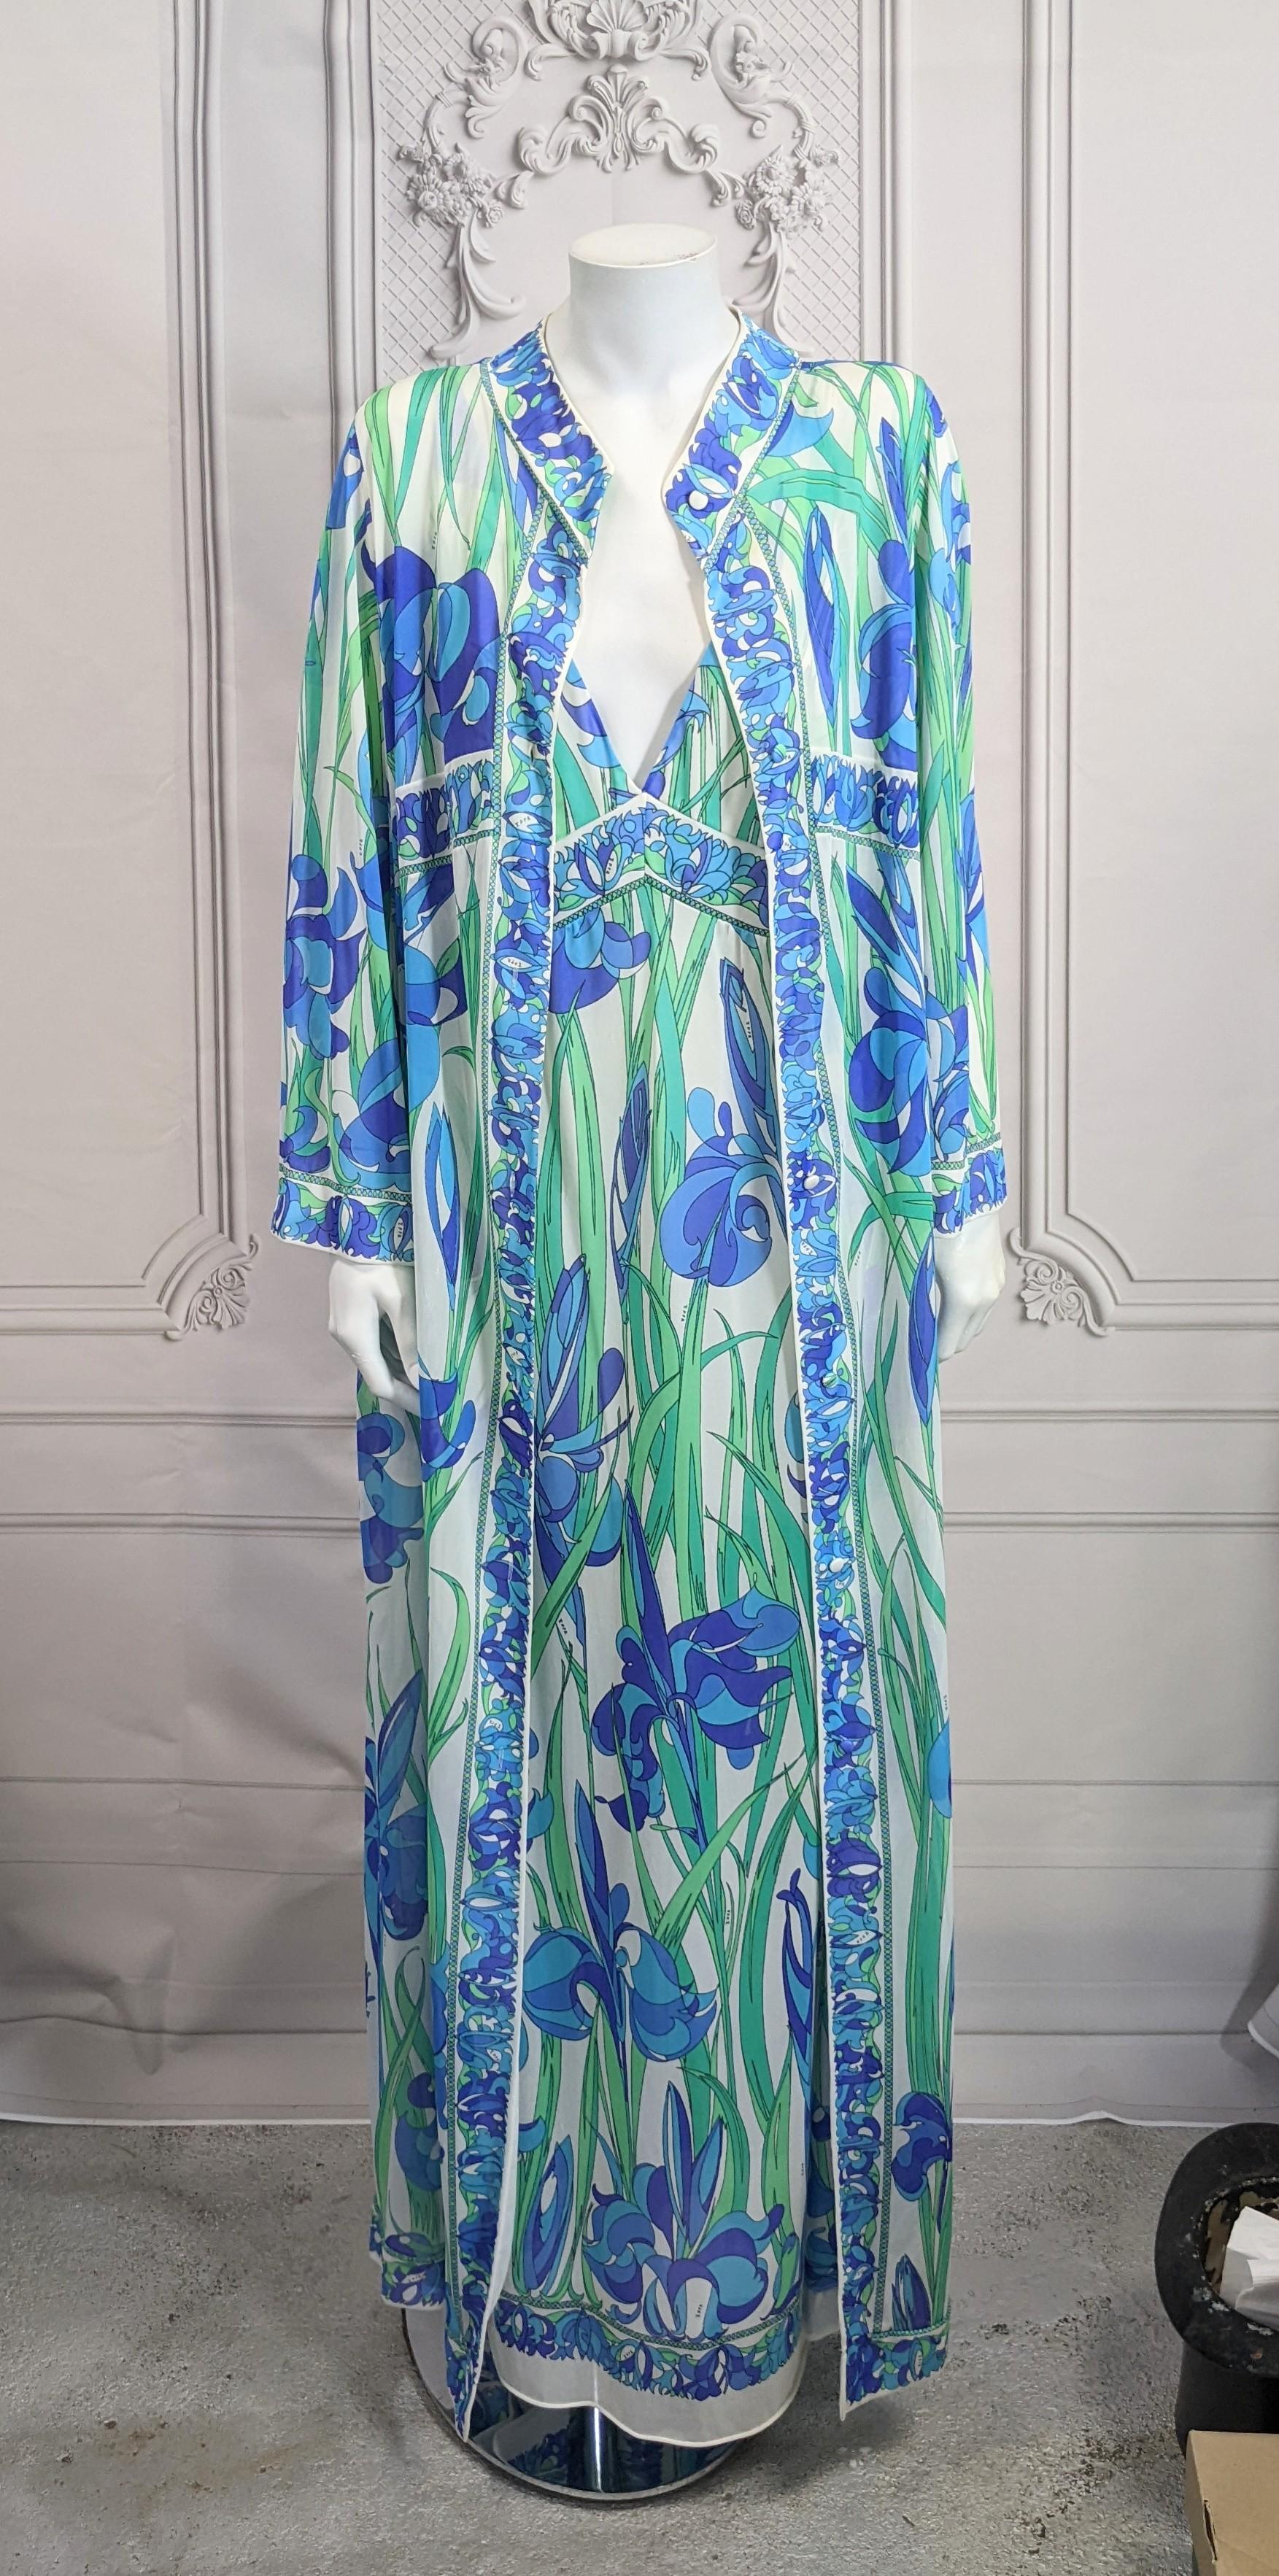  Emilio Pucci Formfit Rogers Ensemble in vibrant printed nylon jersey with flowing iris print. Pullover gown with deep V neckline with matching coat with self buttons.
Size Medium. 1960's USA/Italy. 